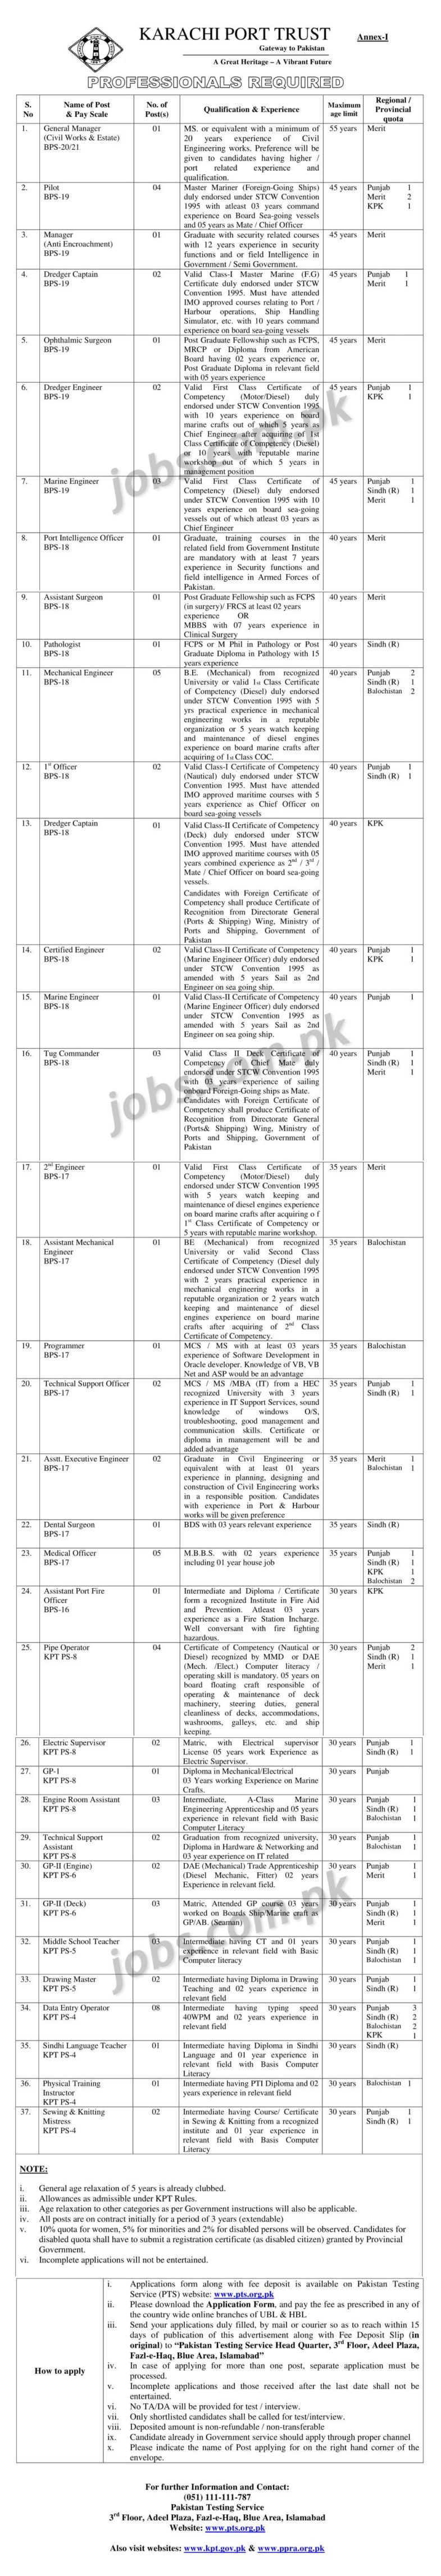 Karachi Port Trust (KPT) Govt of Pakistan Jobs 2019 for 79+ DEOs, IT, Engineering, DAE, Medical, Marine, Teaching, Management & Other Posts (Download PTS Form)